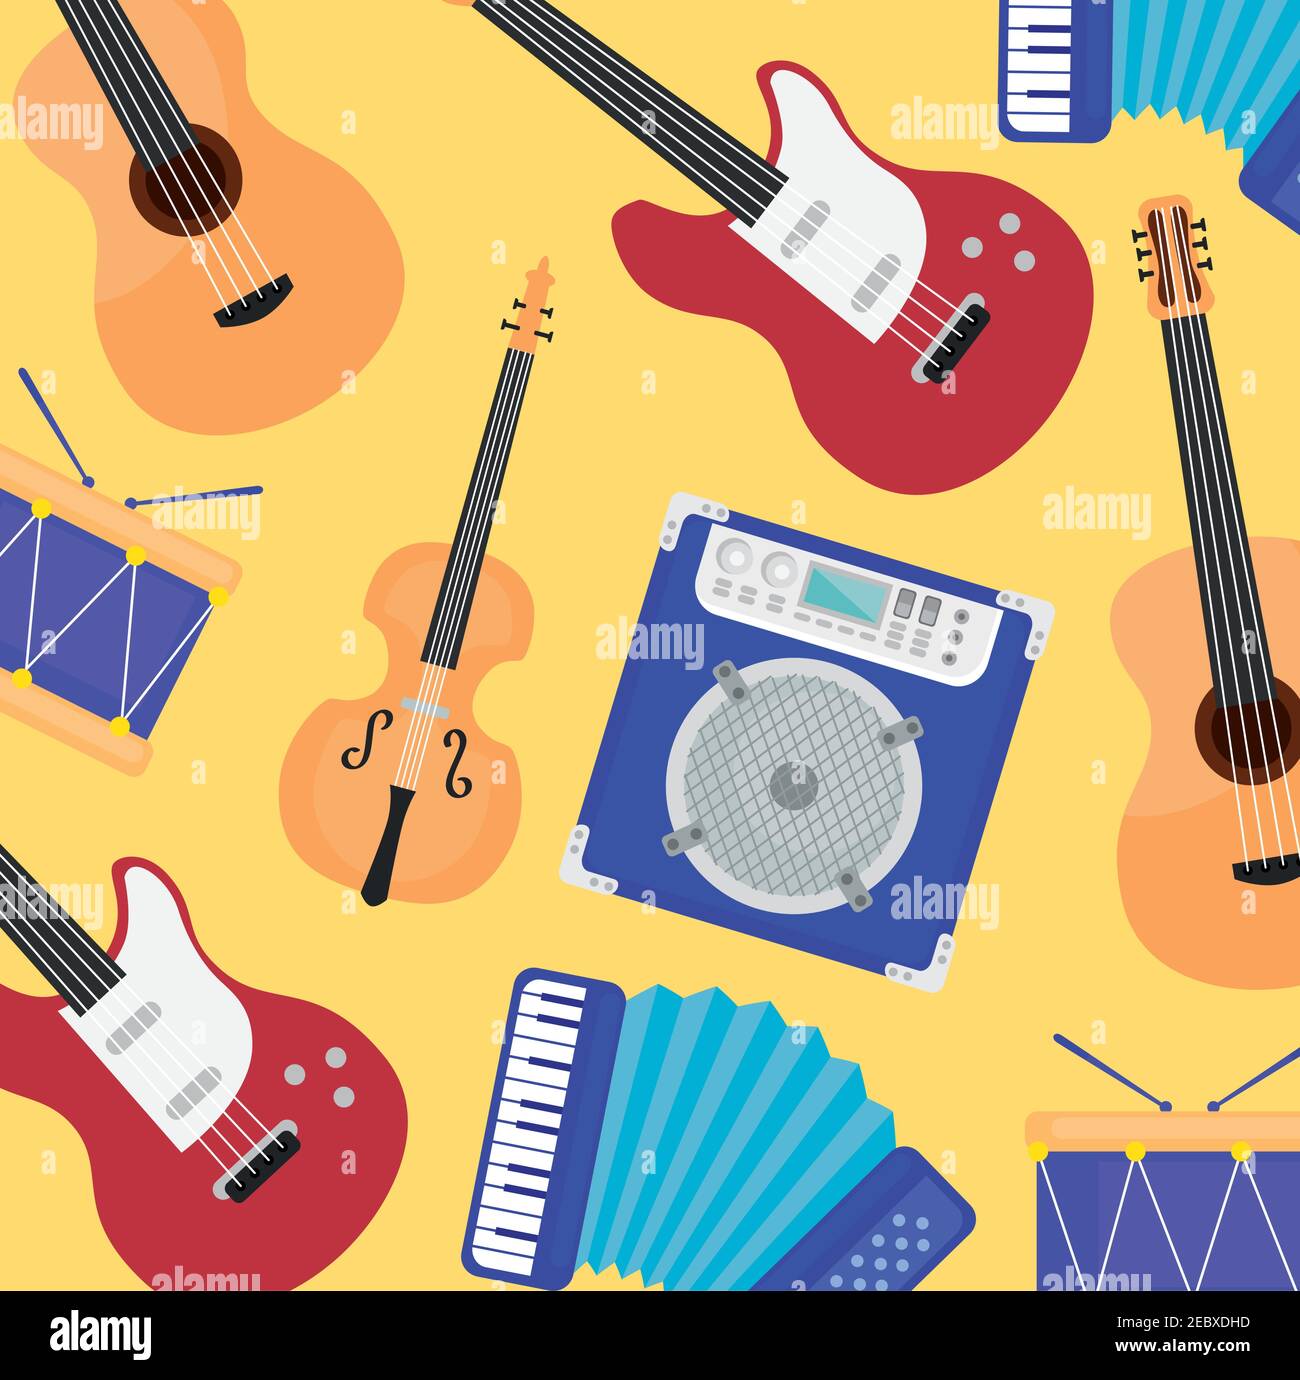 pattern-of-musical-instruments-set-icons-stock-vector-image-art-alamy